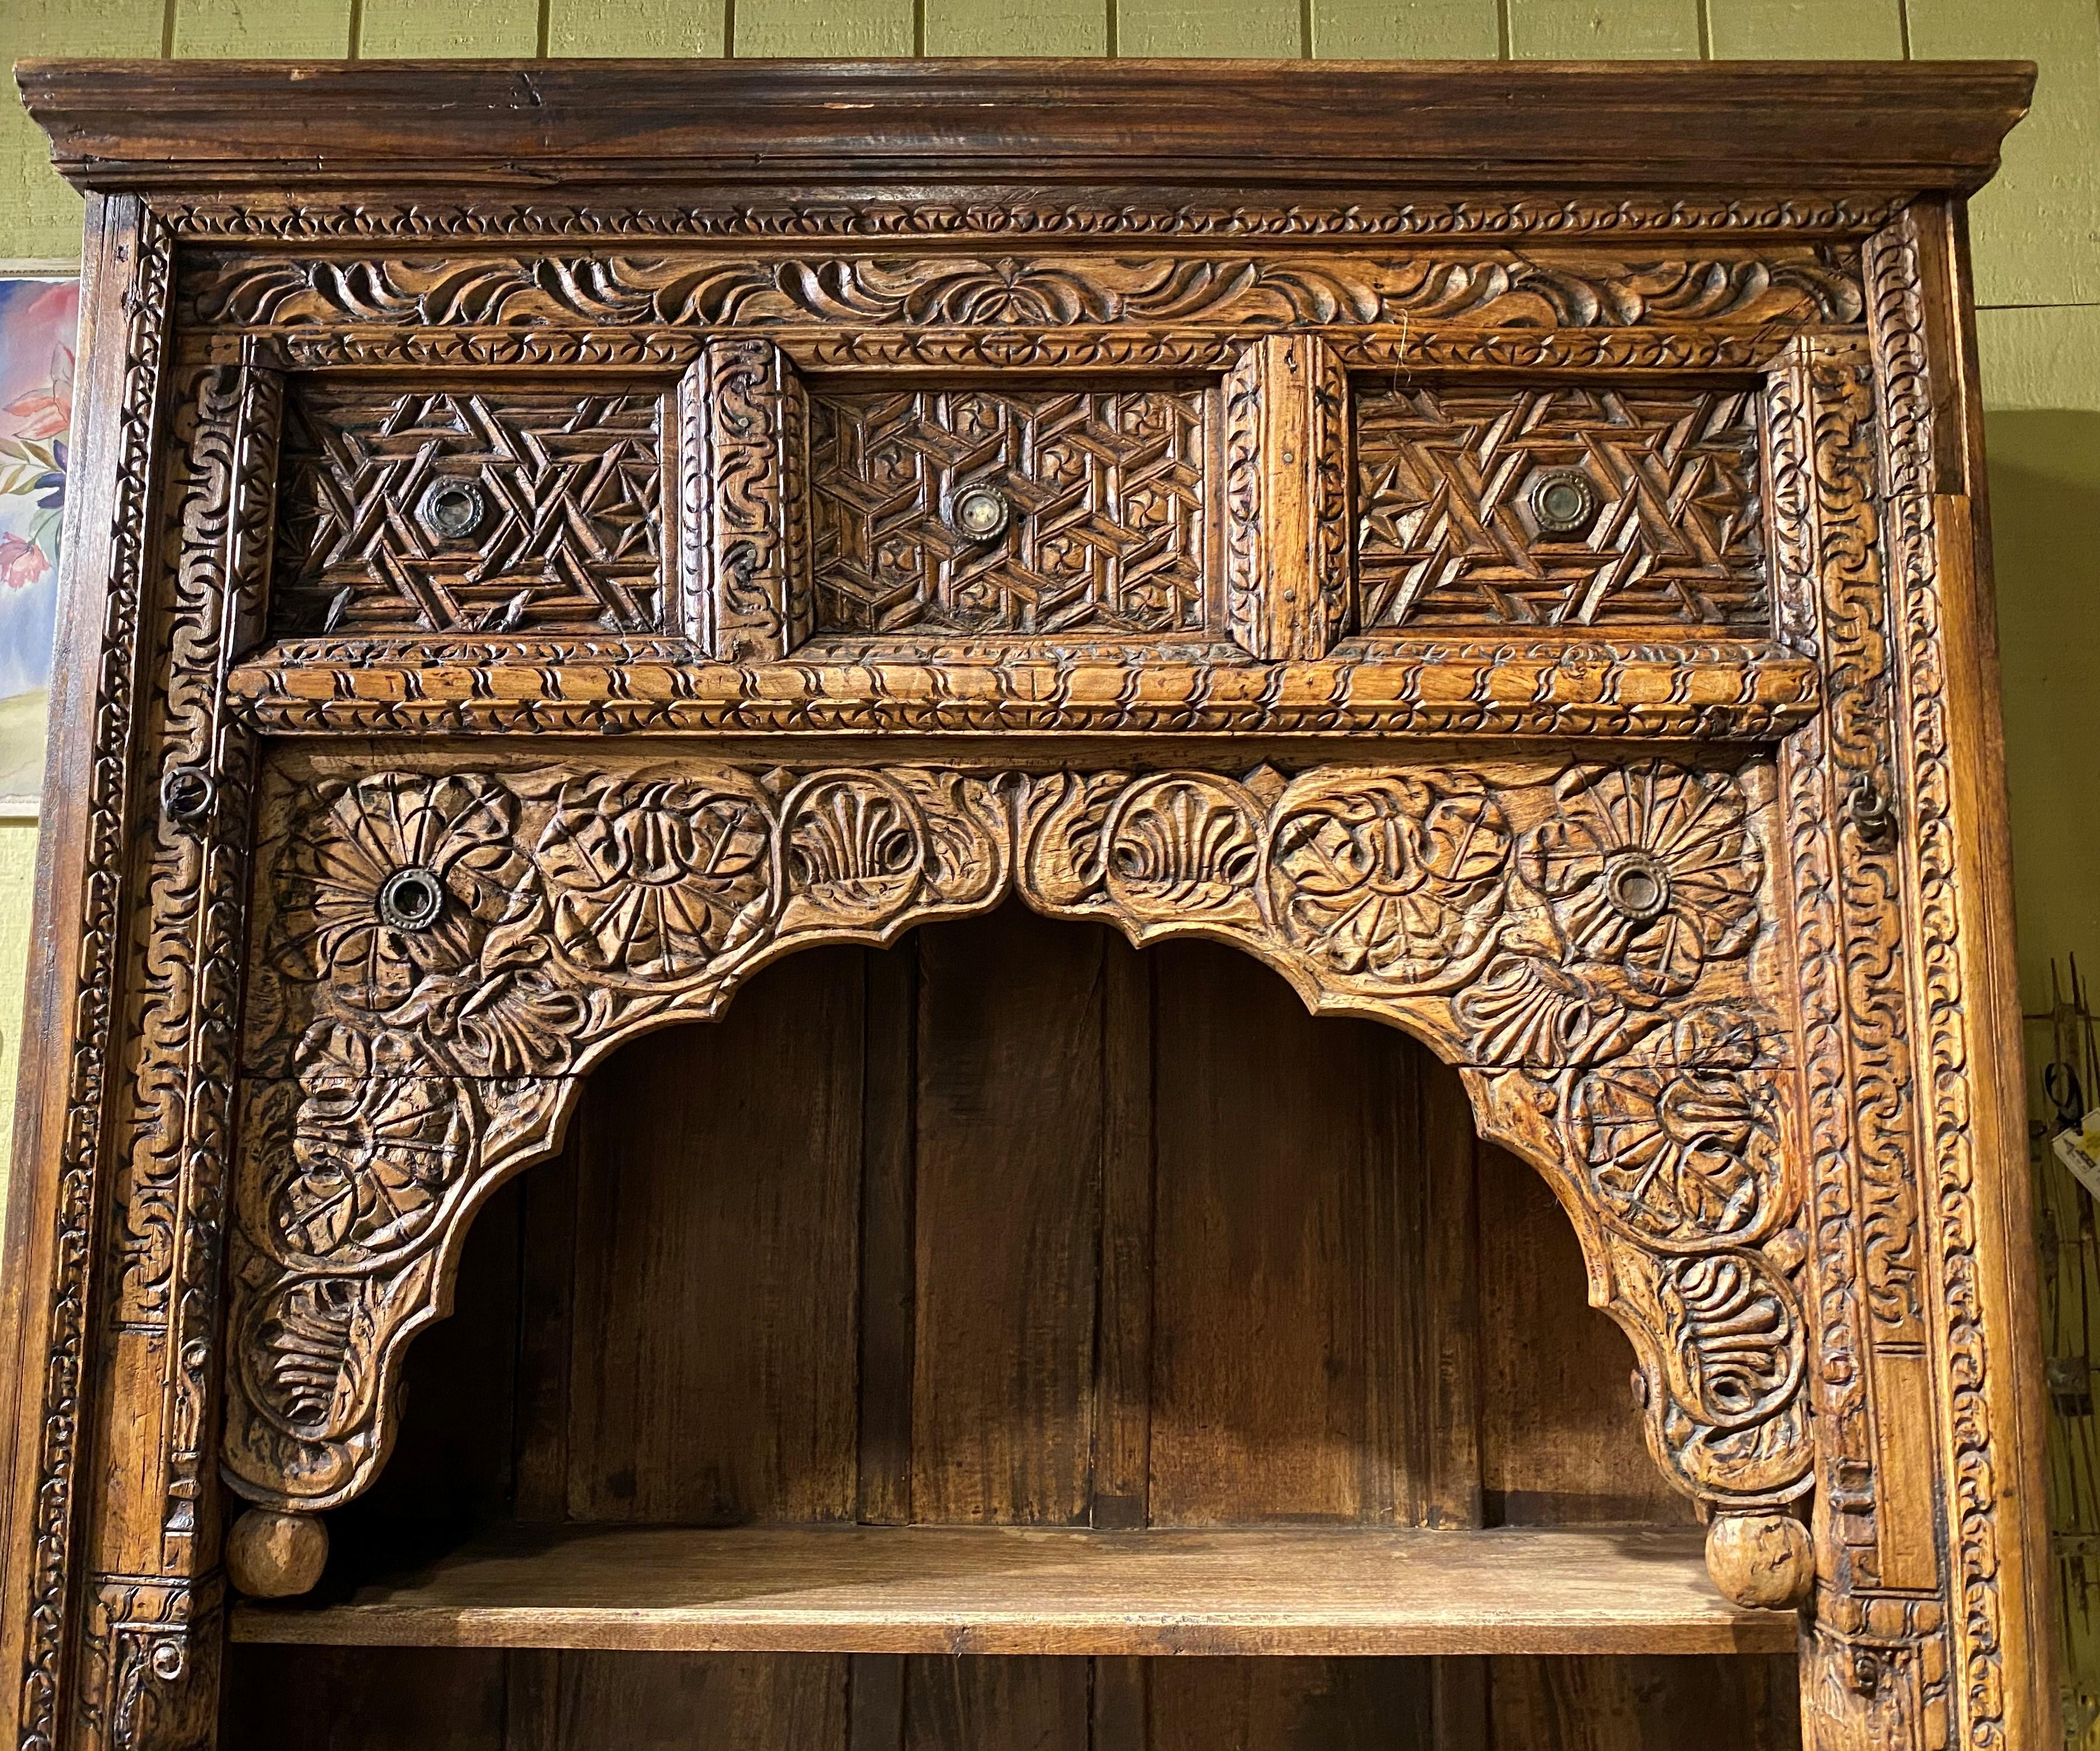 Antique carved wooden Indian arched doorway dating to the late 19th or early 20th century that has been converted into a three- shelf bookcase, with a molded cornice and upper carved panels adorned with metal decoration. Very good overall condition,